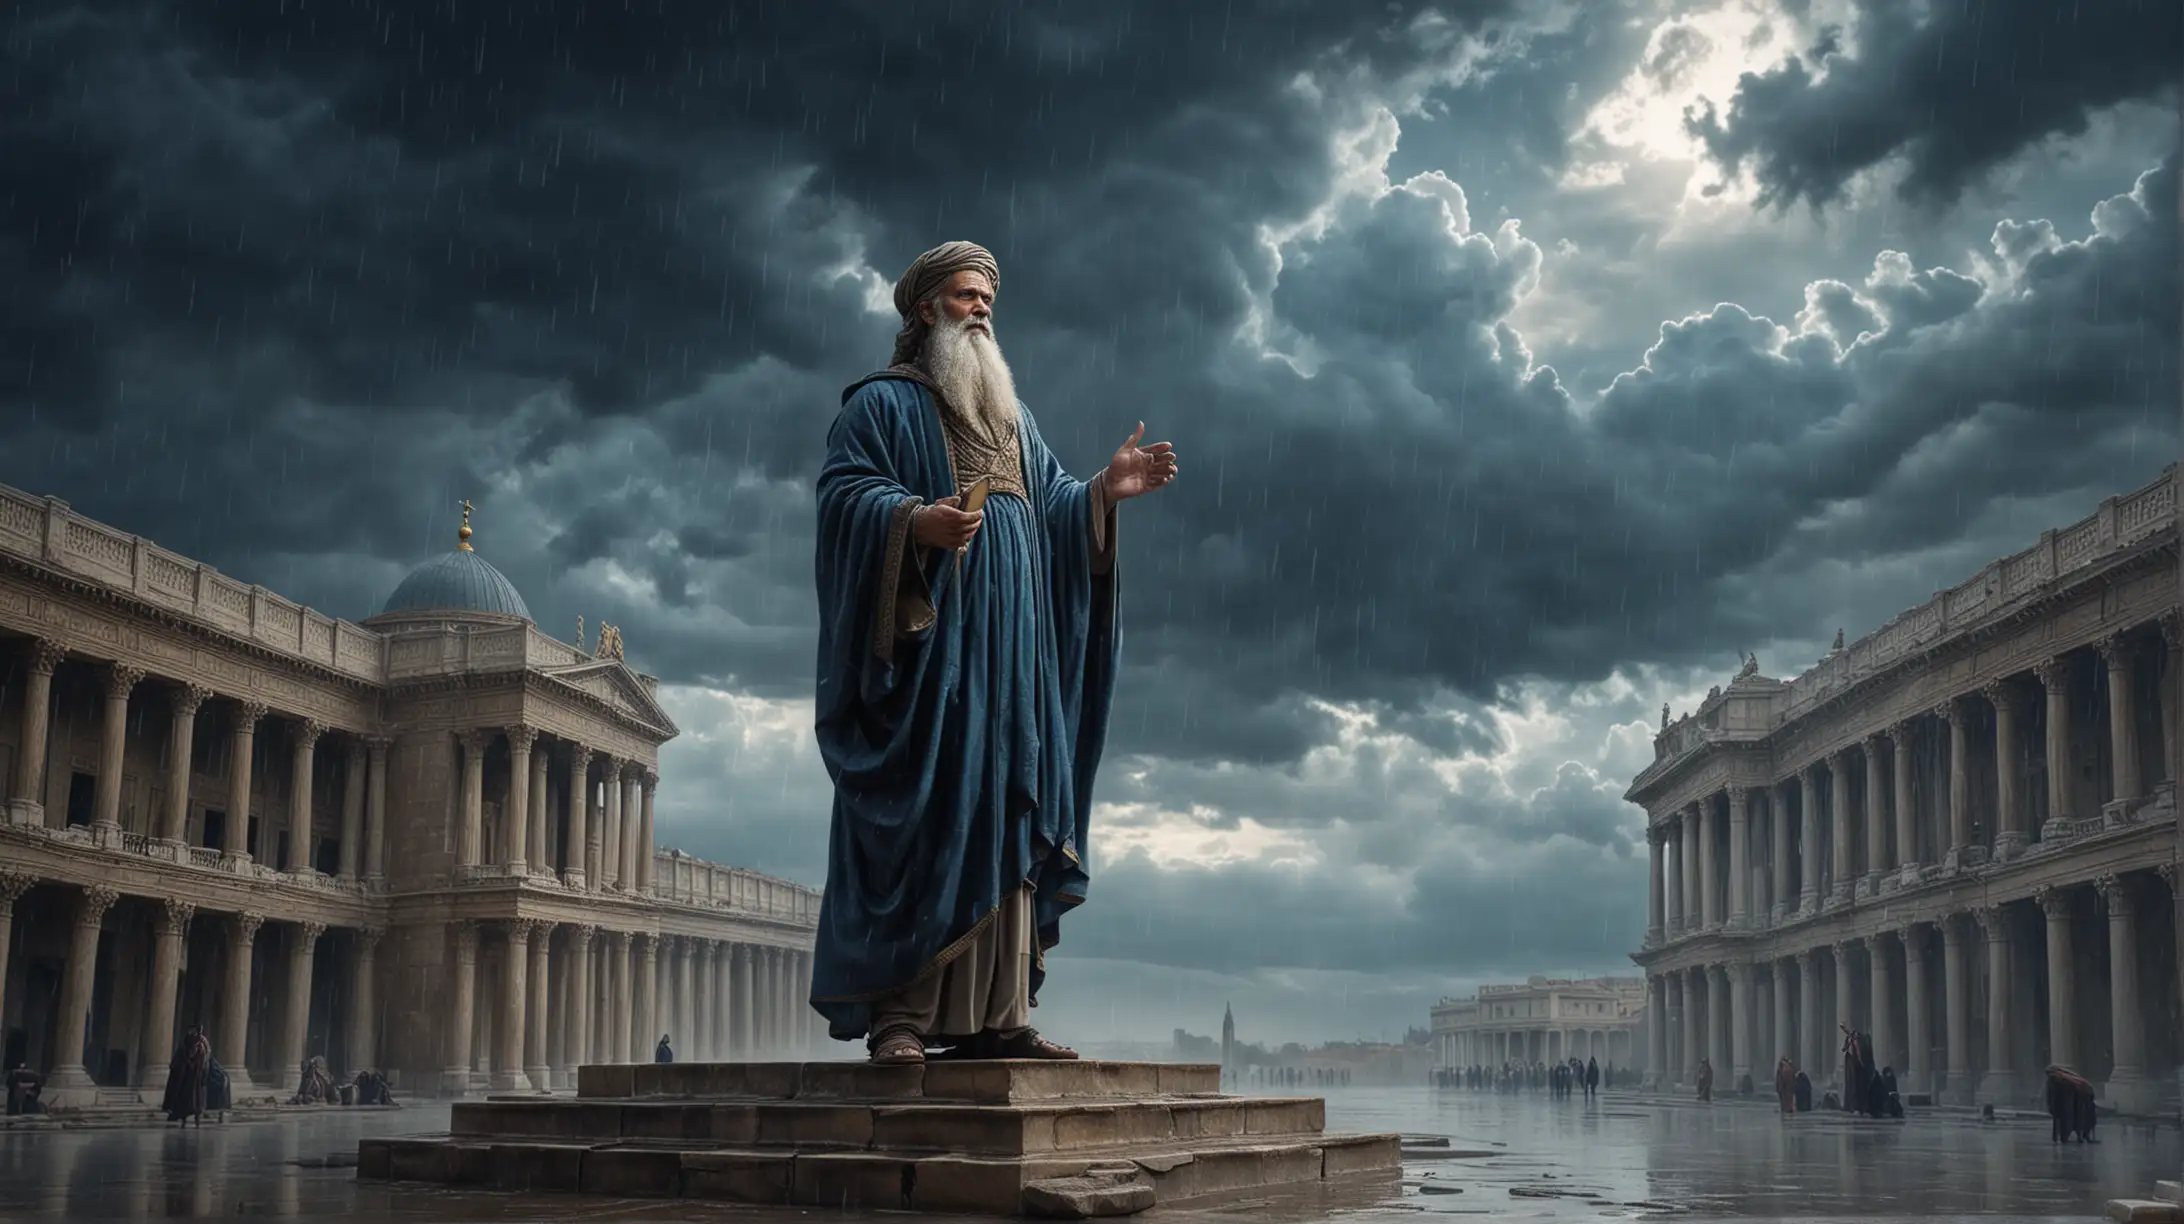 Prophet Jeremiah Preaching in a Regal Palace Amidst Dark Blue Rainy Atmosphere